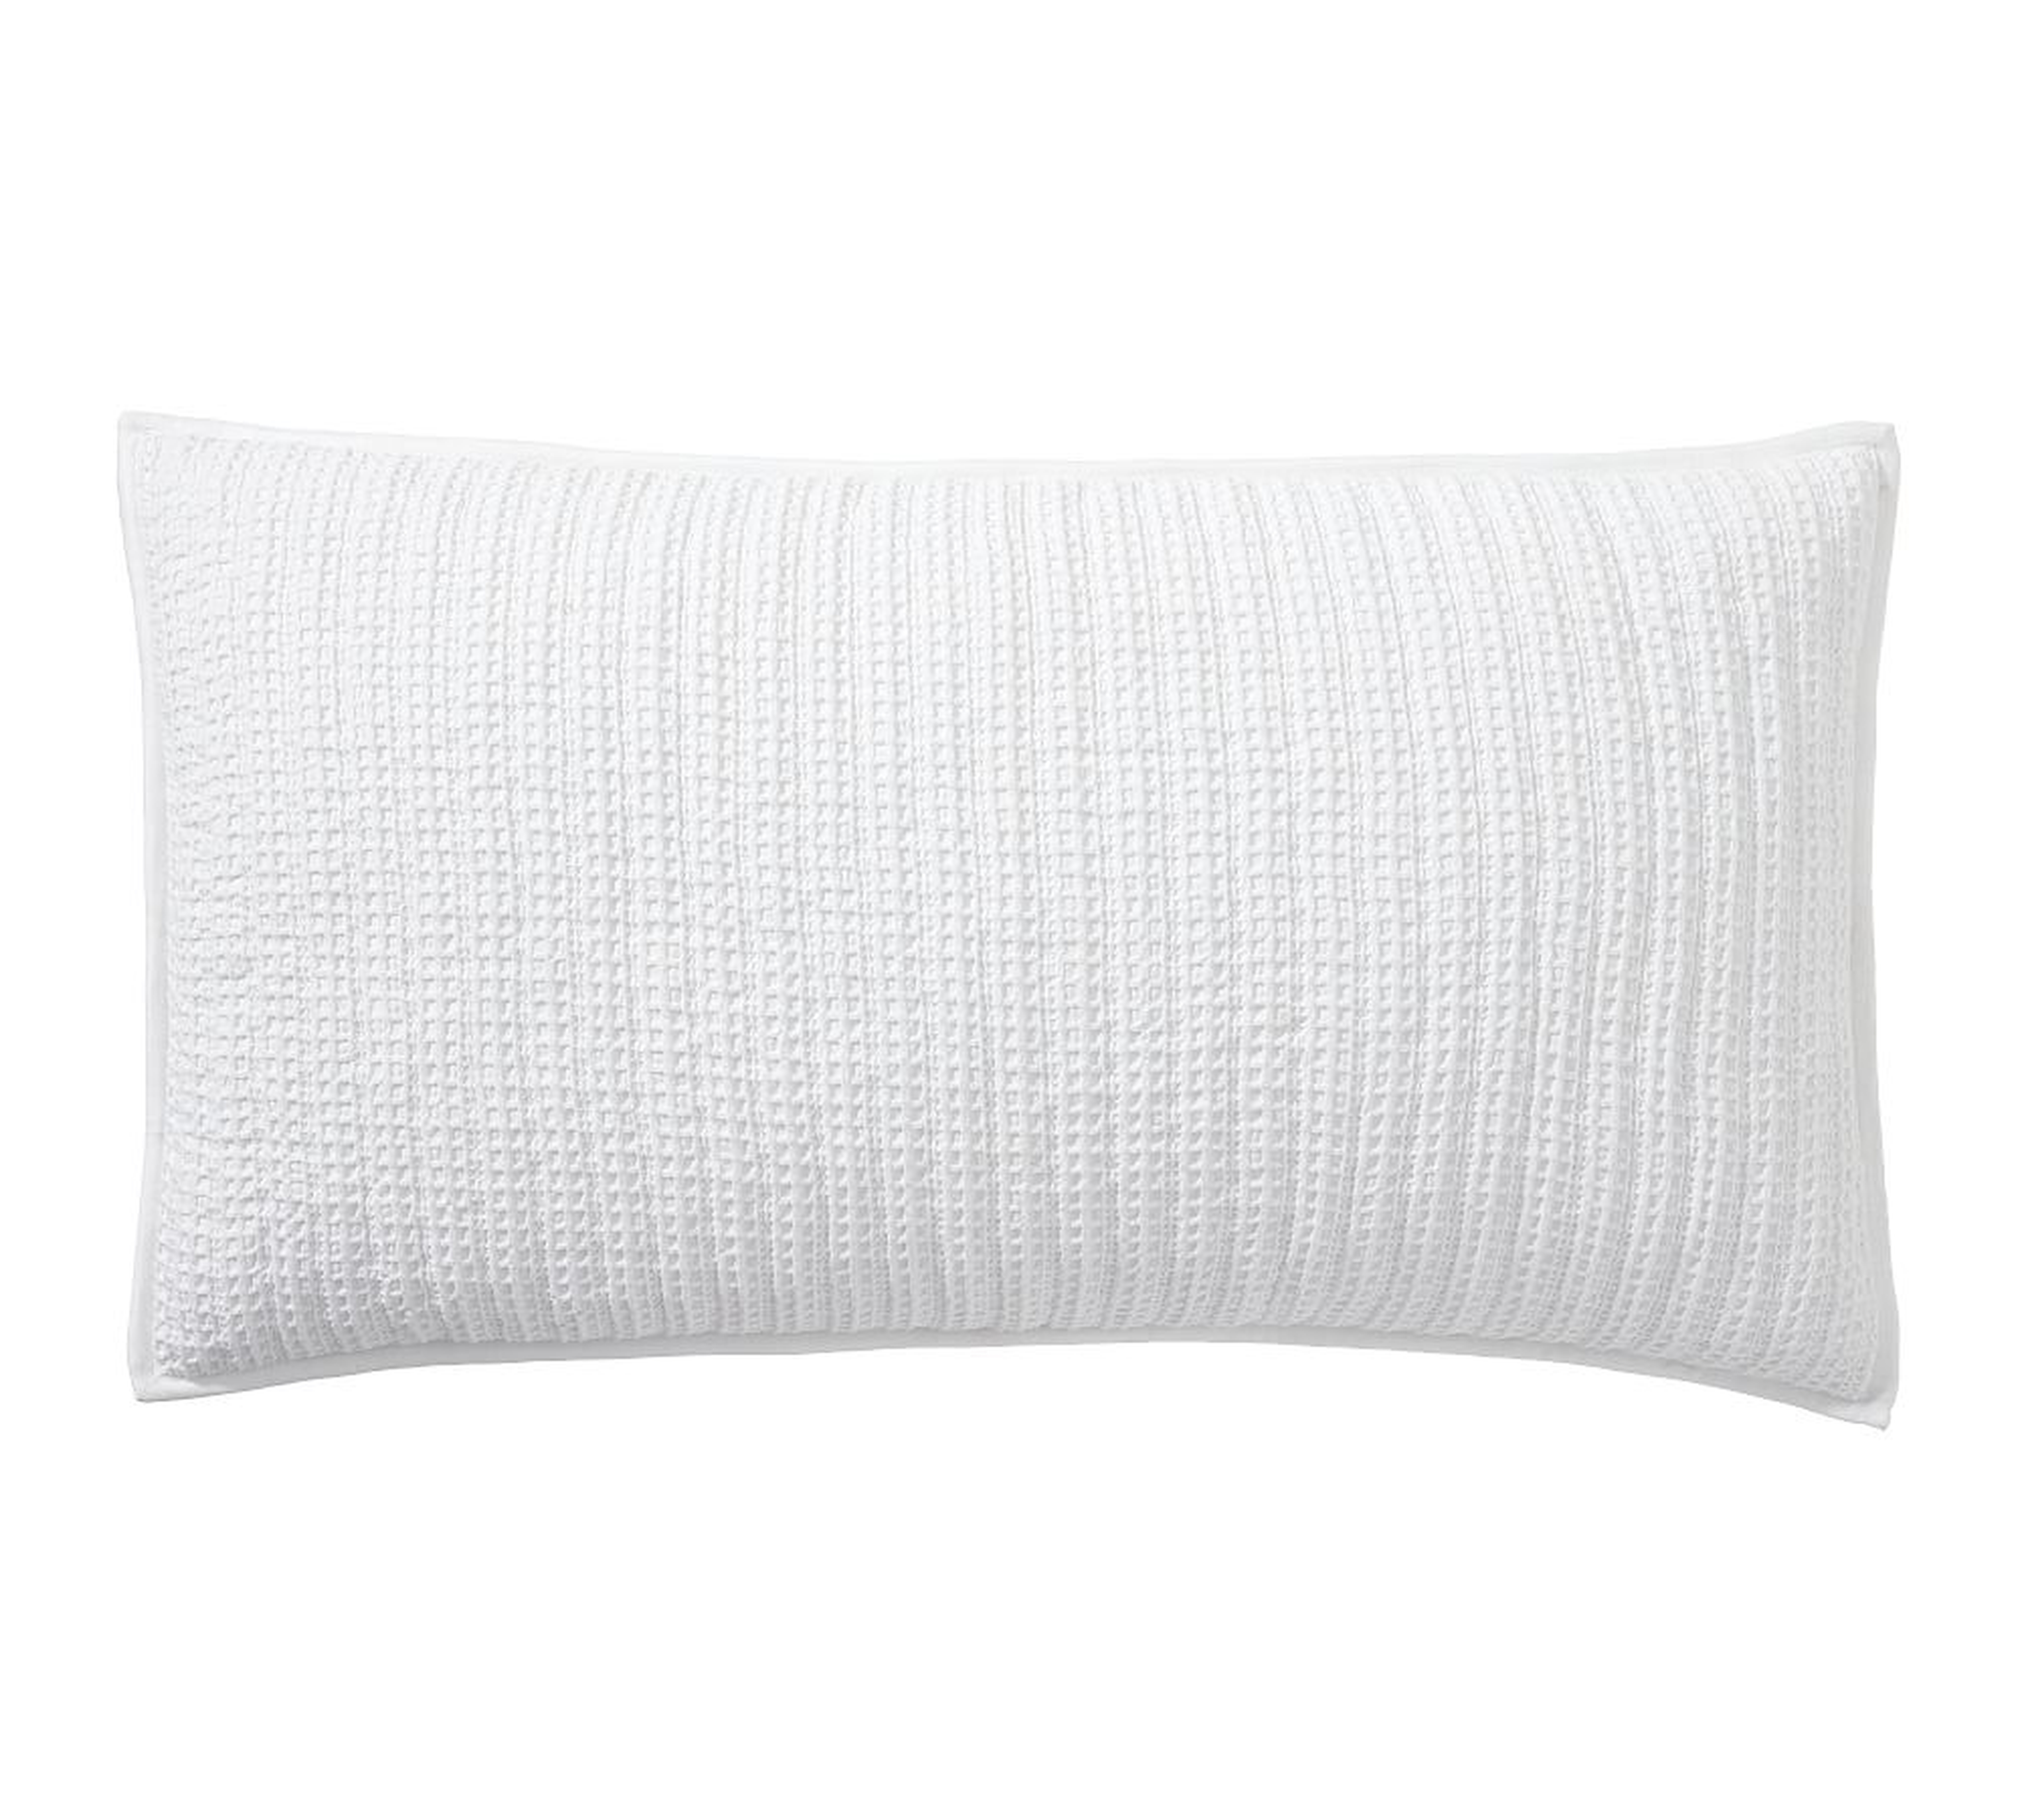 Honeycomb Quilted Shams, King, White, Set of 2 - Pottery Barn